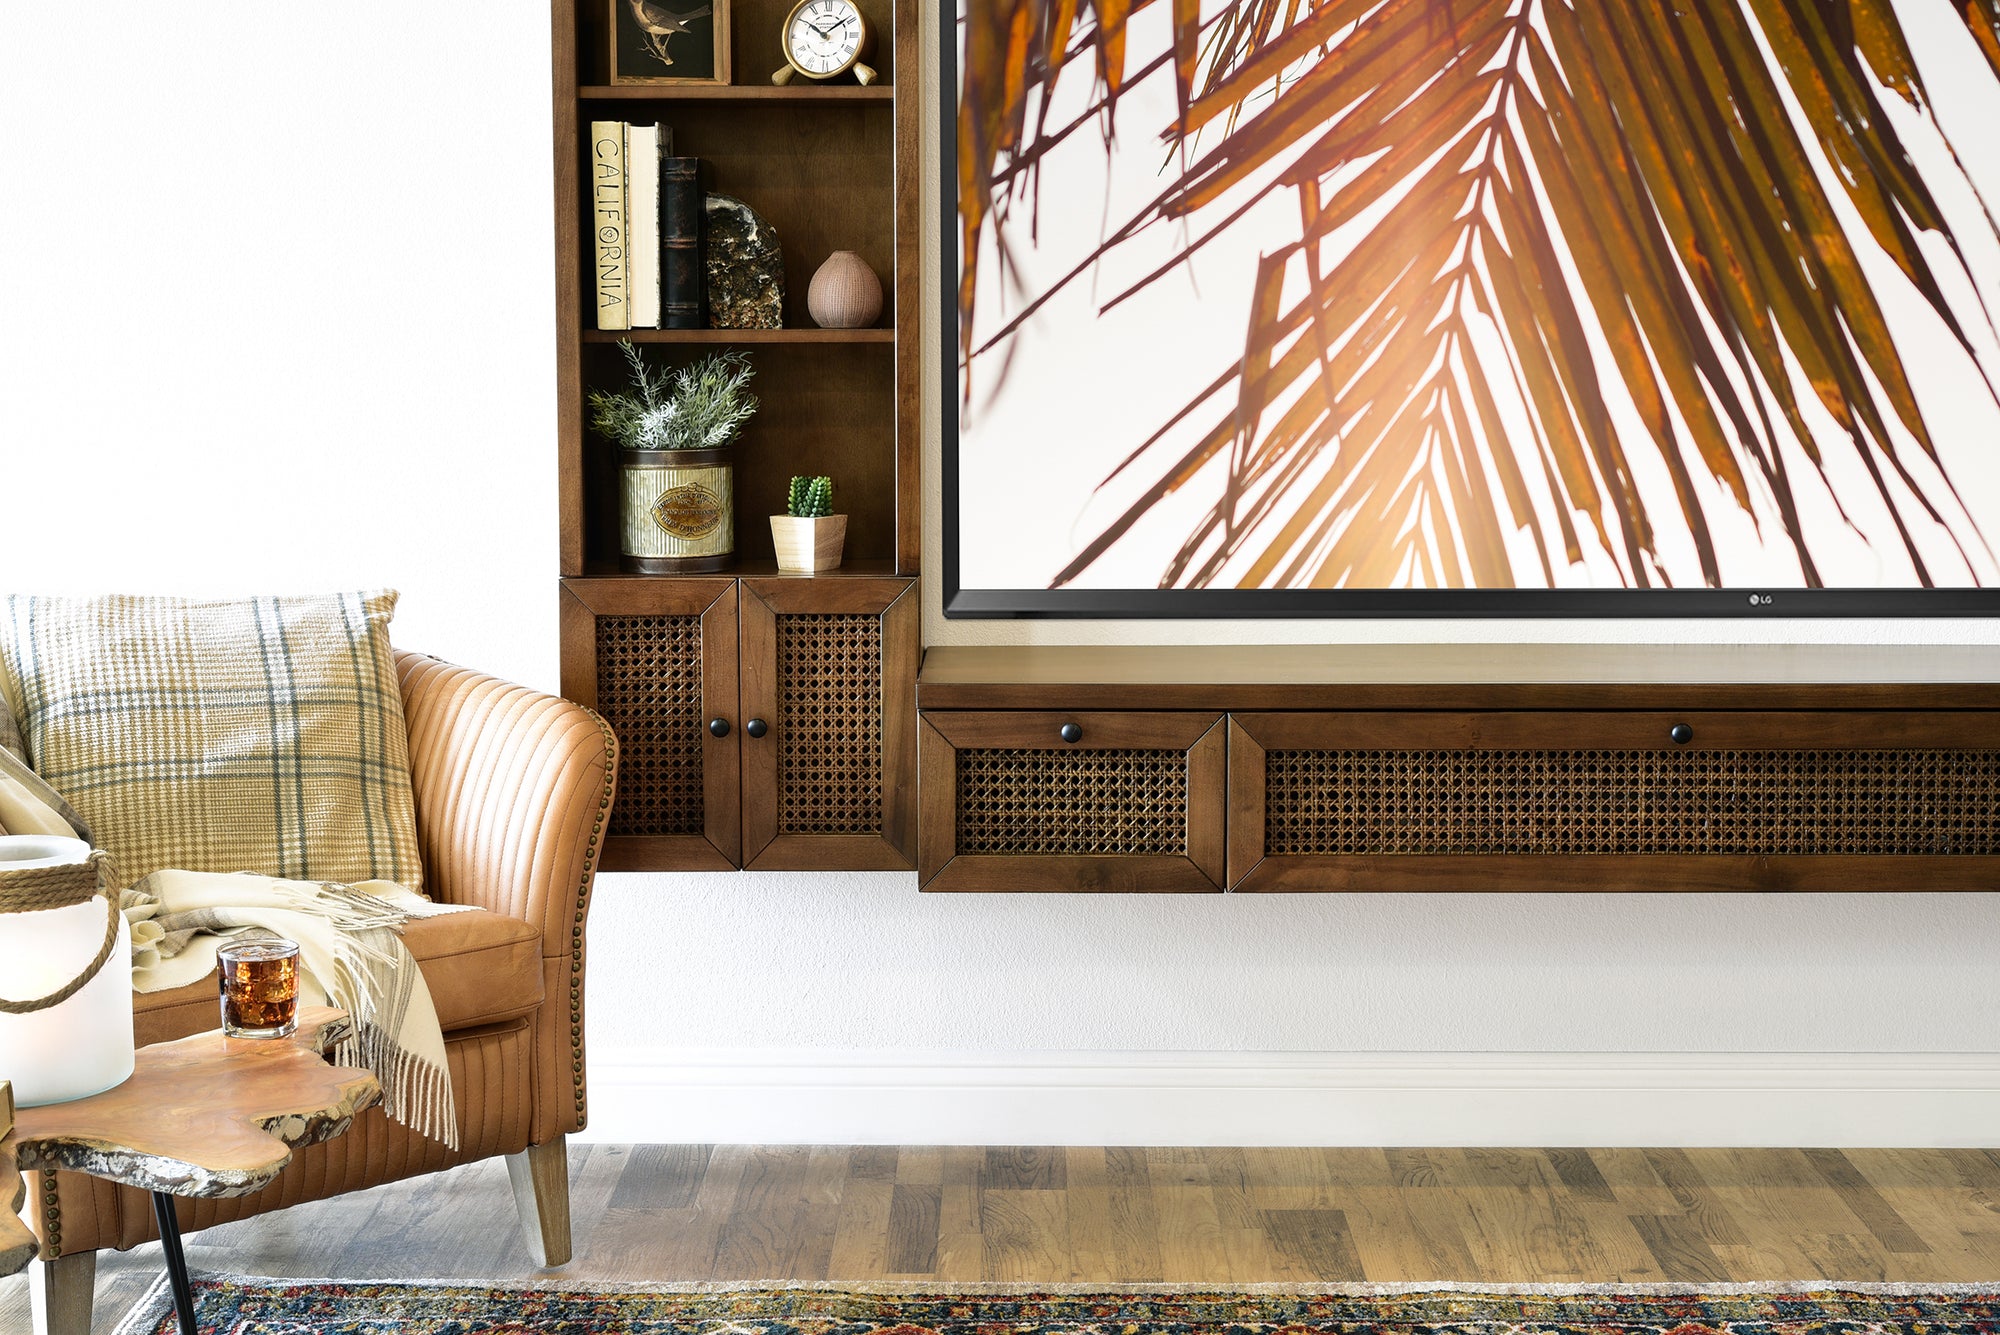 Floating TV Stand - Woodwaves - Floating Entertainment Center Cane Rattan Wicker Console - Sugar Cane Collection - Spice